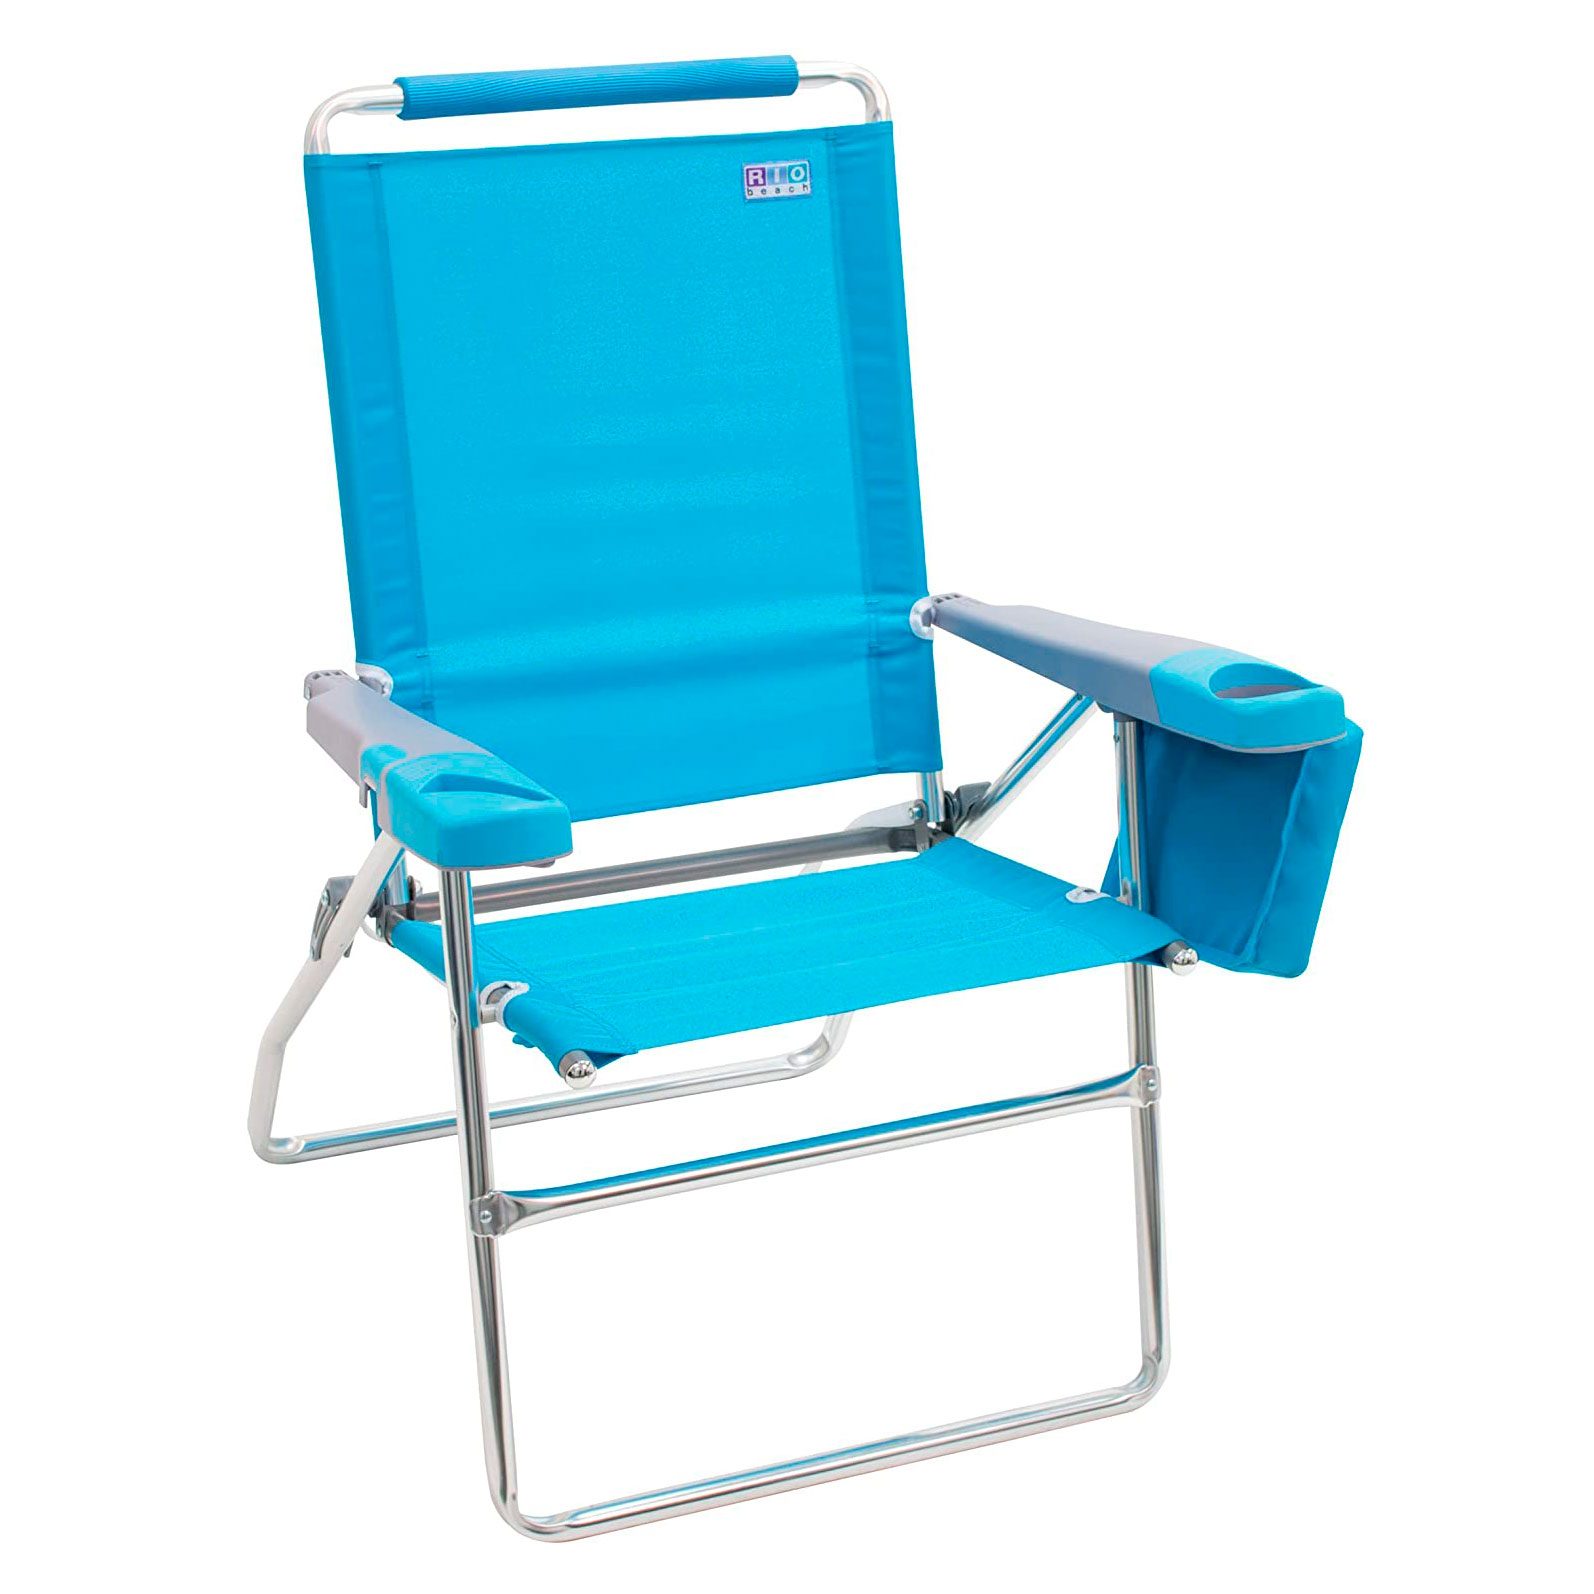 12 Best Beach Chairs for 2021 | Light, Easy-to-Carry, Roomy Beach Chairs